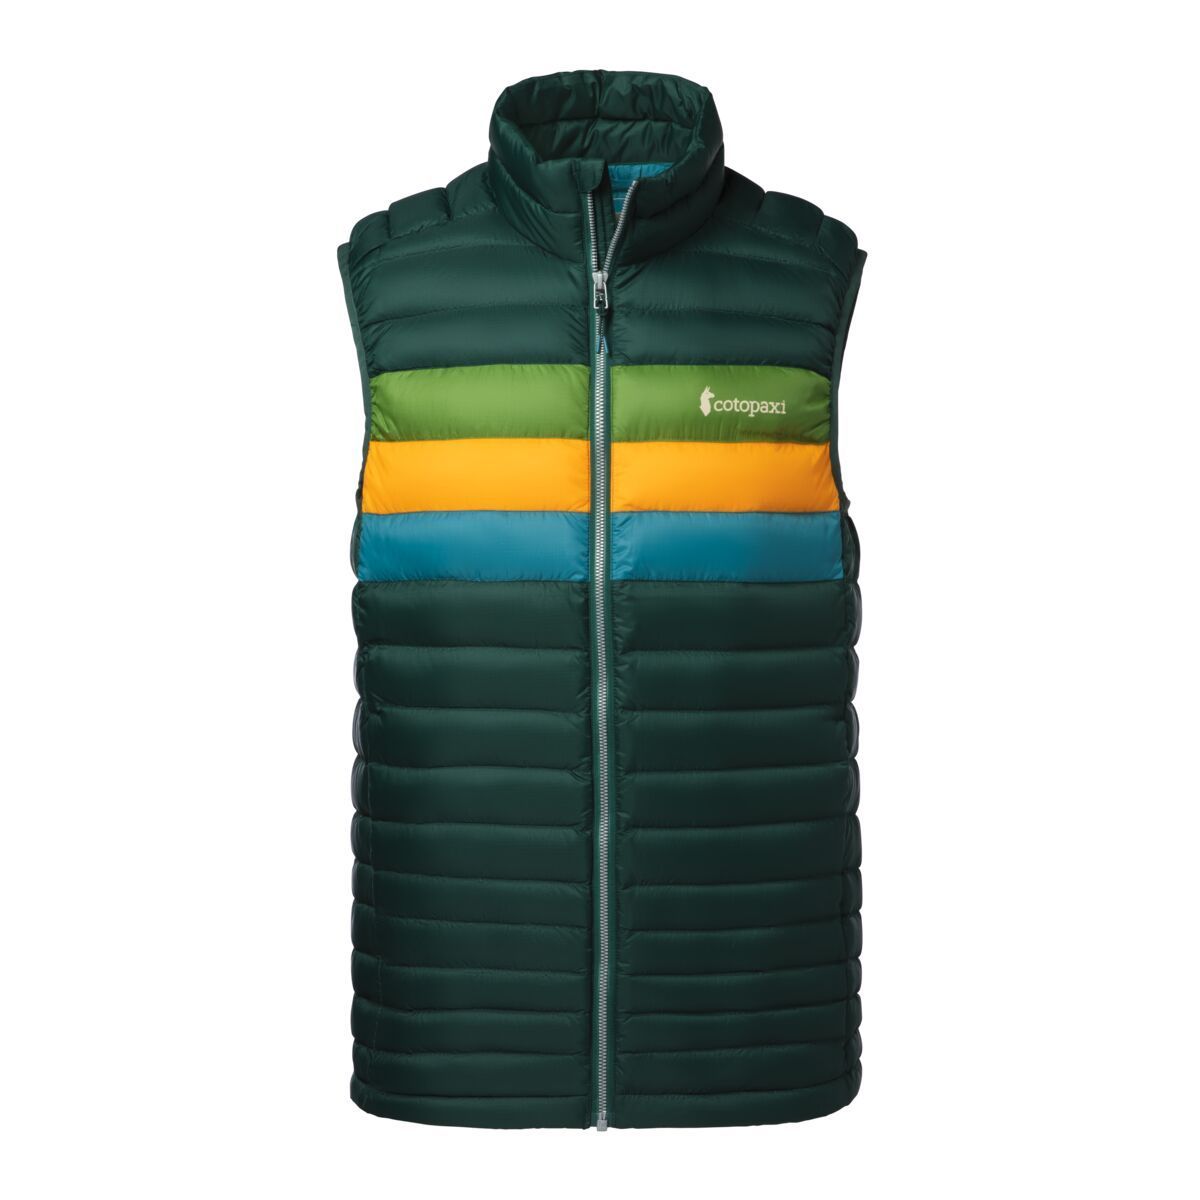 The Best Down Vests for Hiking in 2022 - Best Hiking